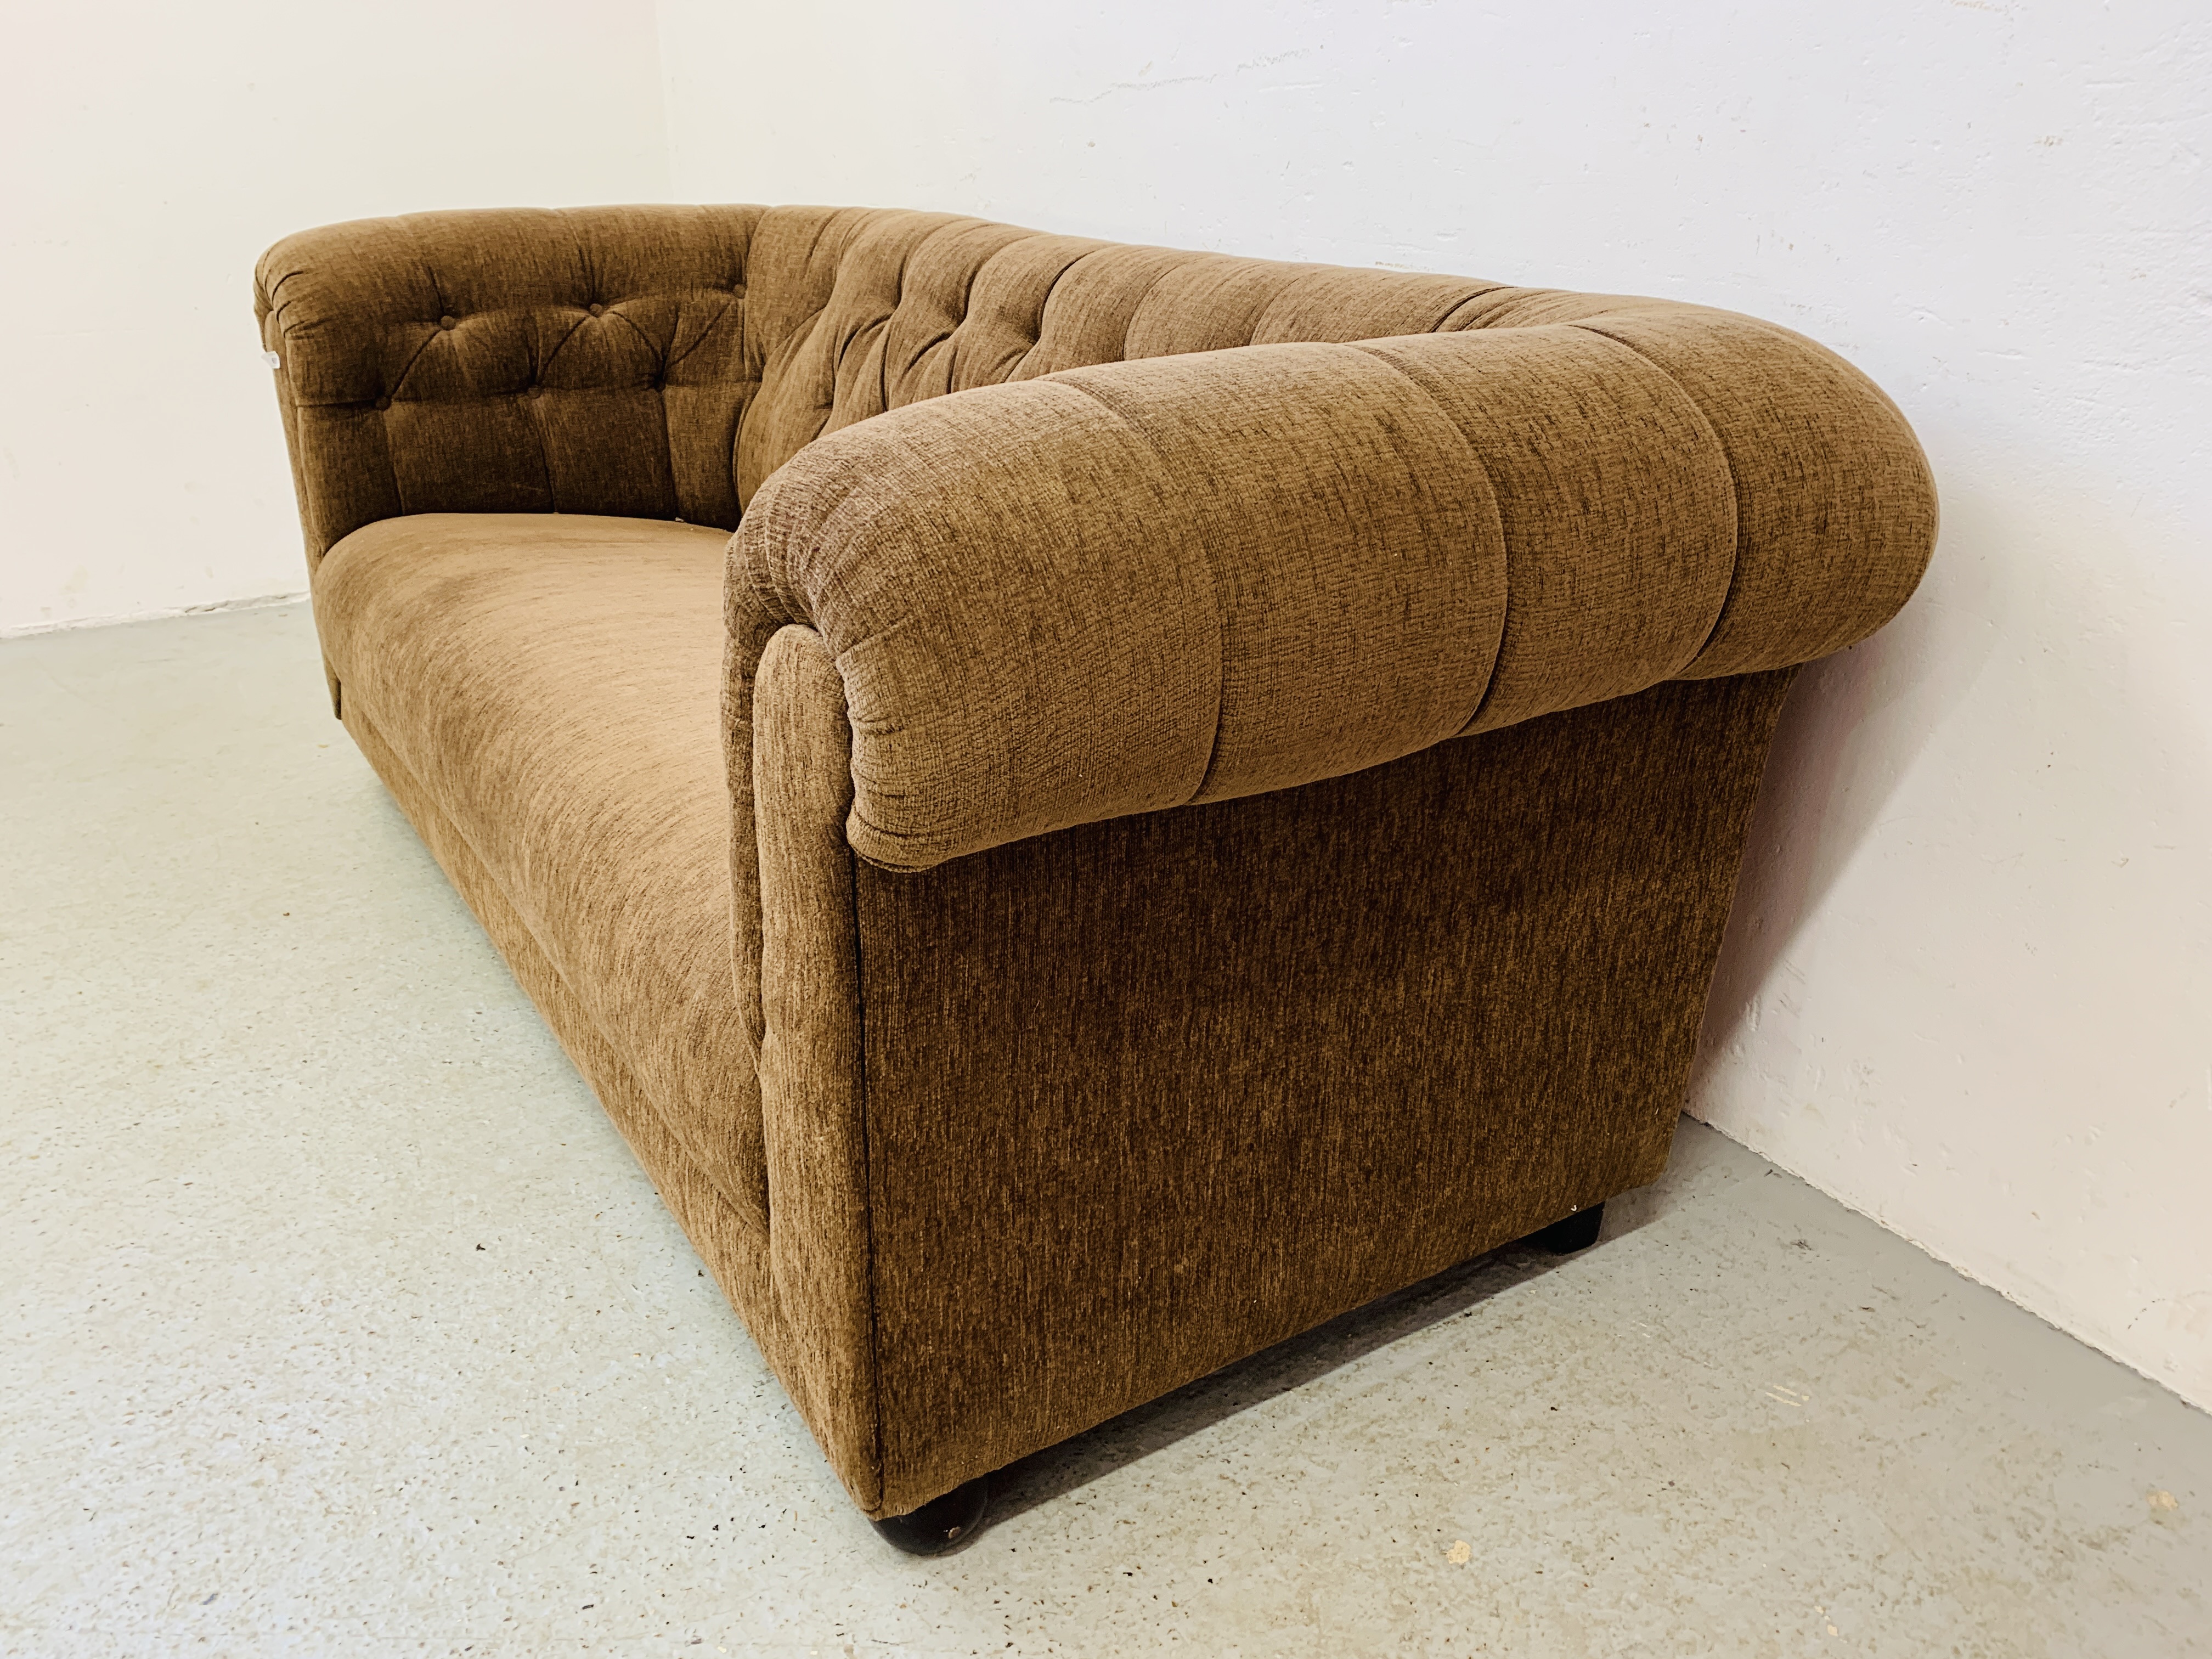 A MODERN BROWN CHESTERFIELD STYLE BUTTON BACK SOFA. L 195CM. D 92CM. H 75CM. - Image 4 of 8